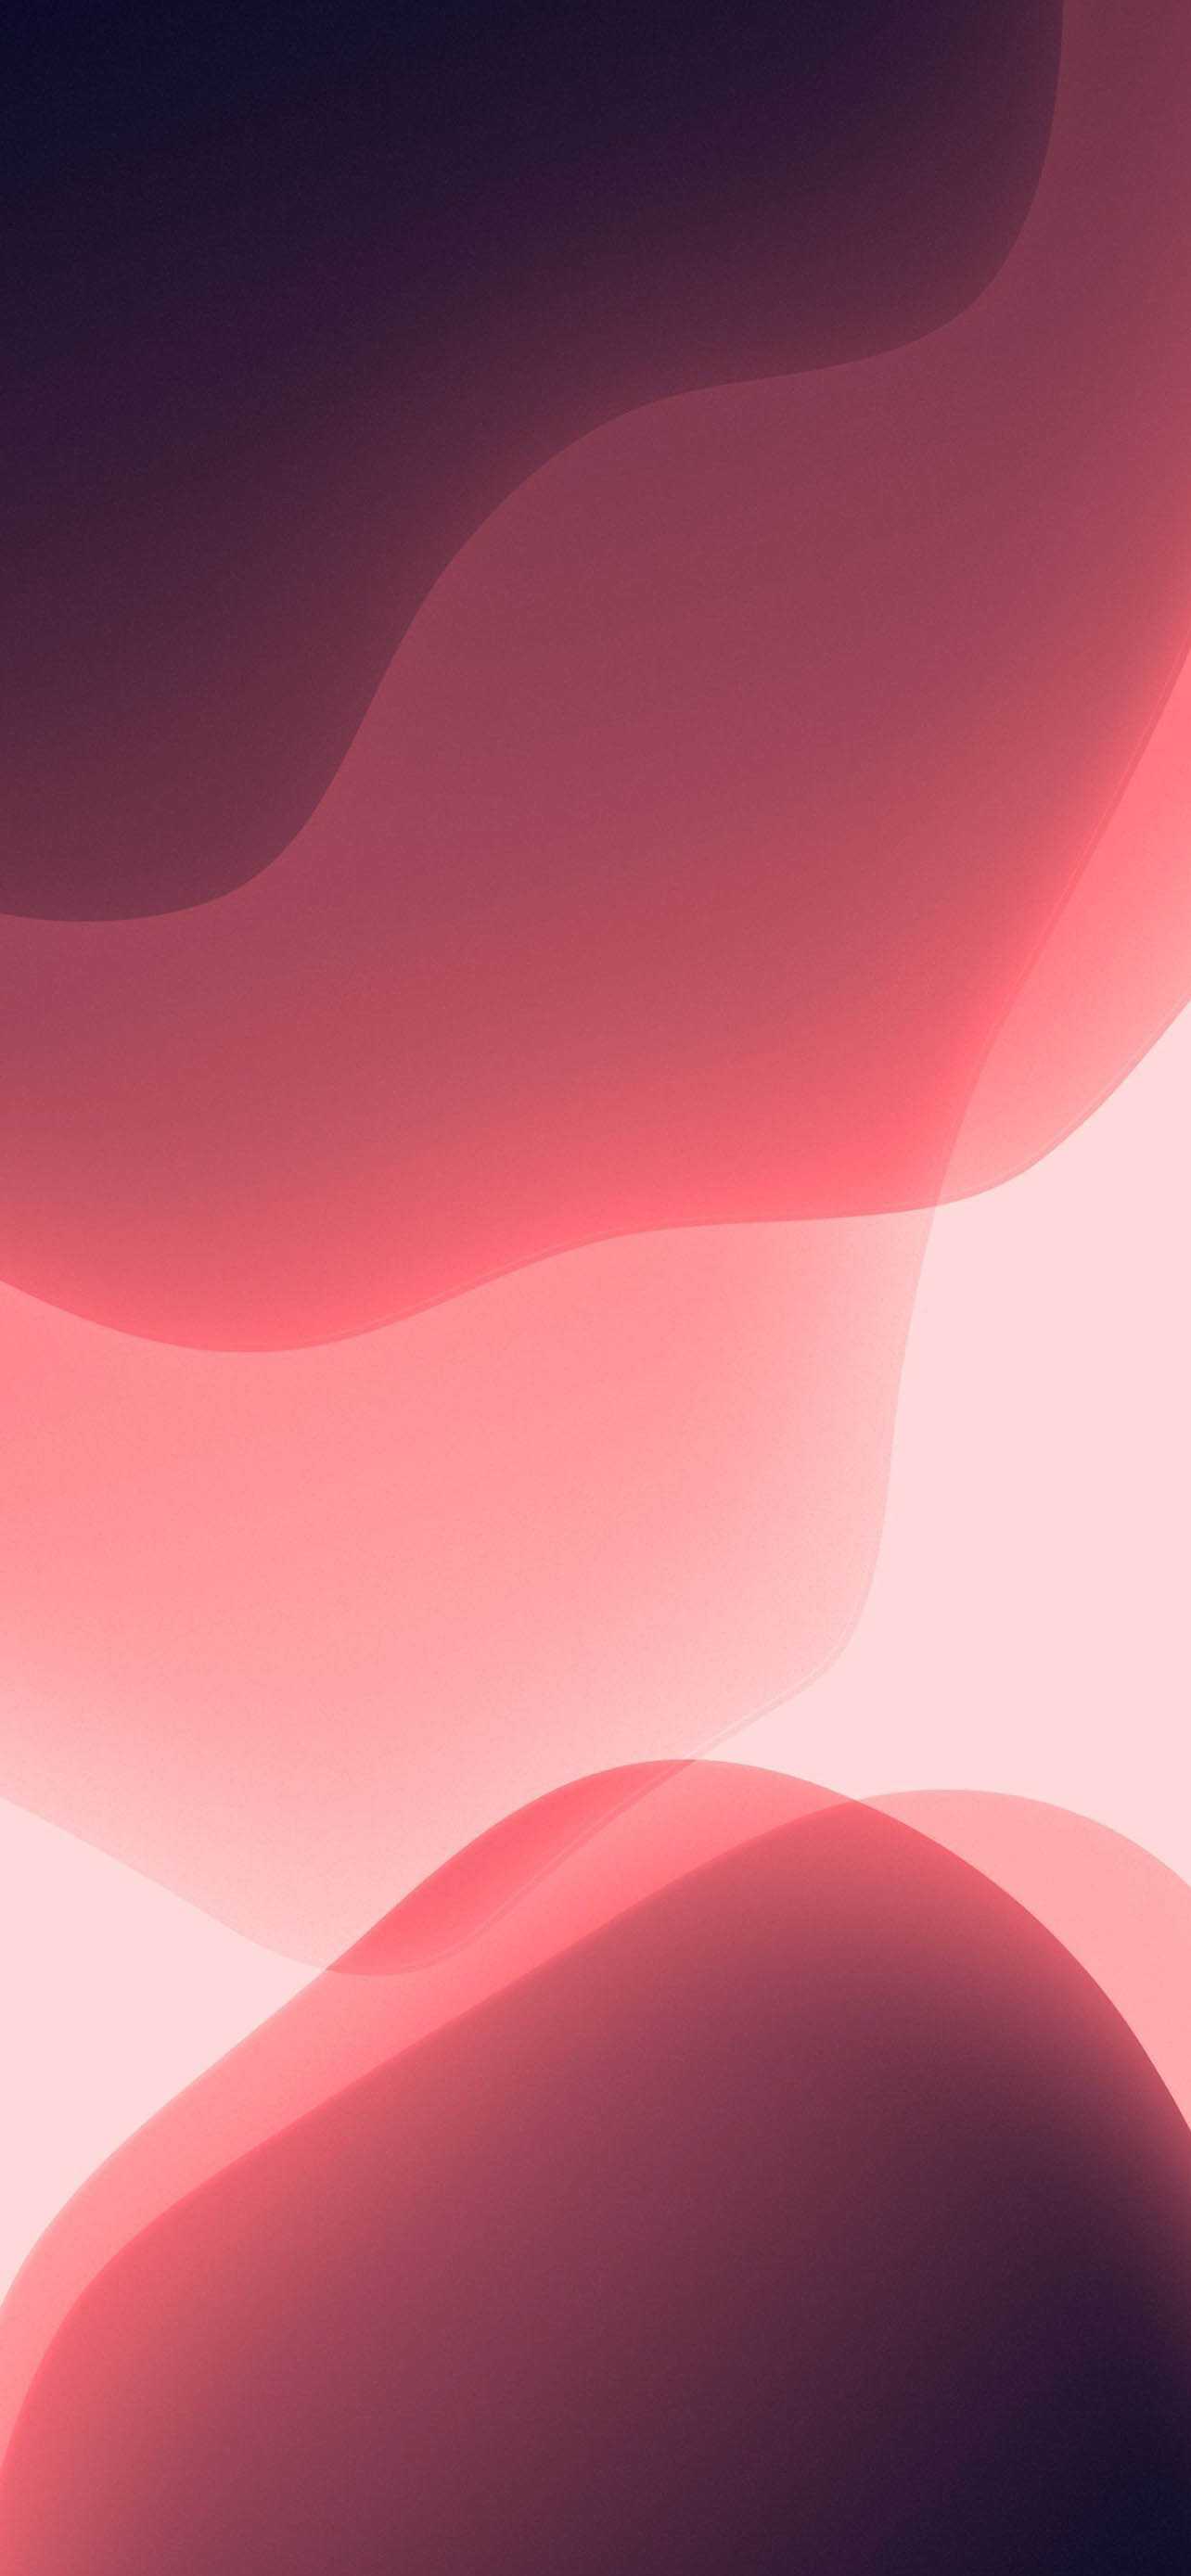 3D Render Wallpaper 4K Waves Girly Abstract 7041